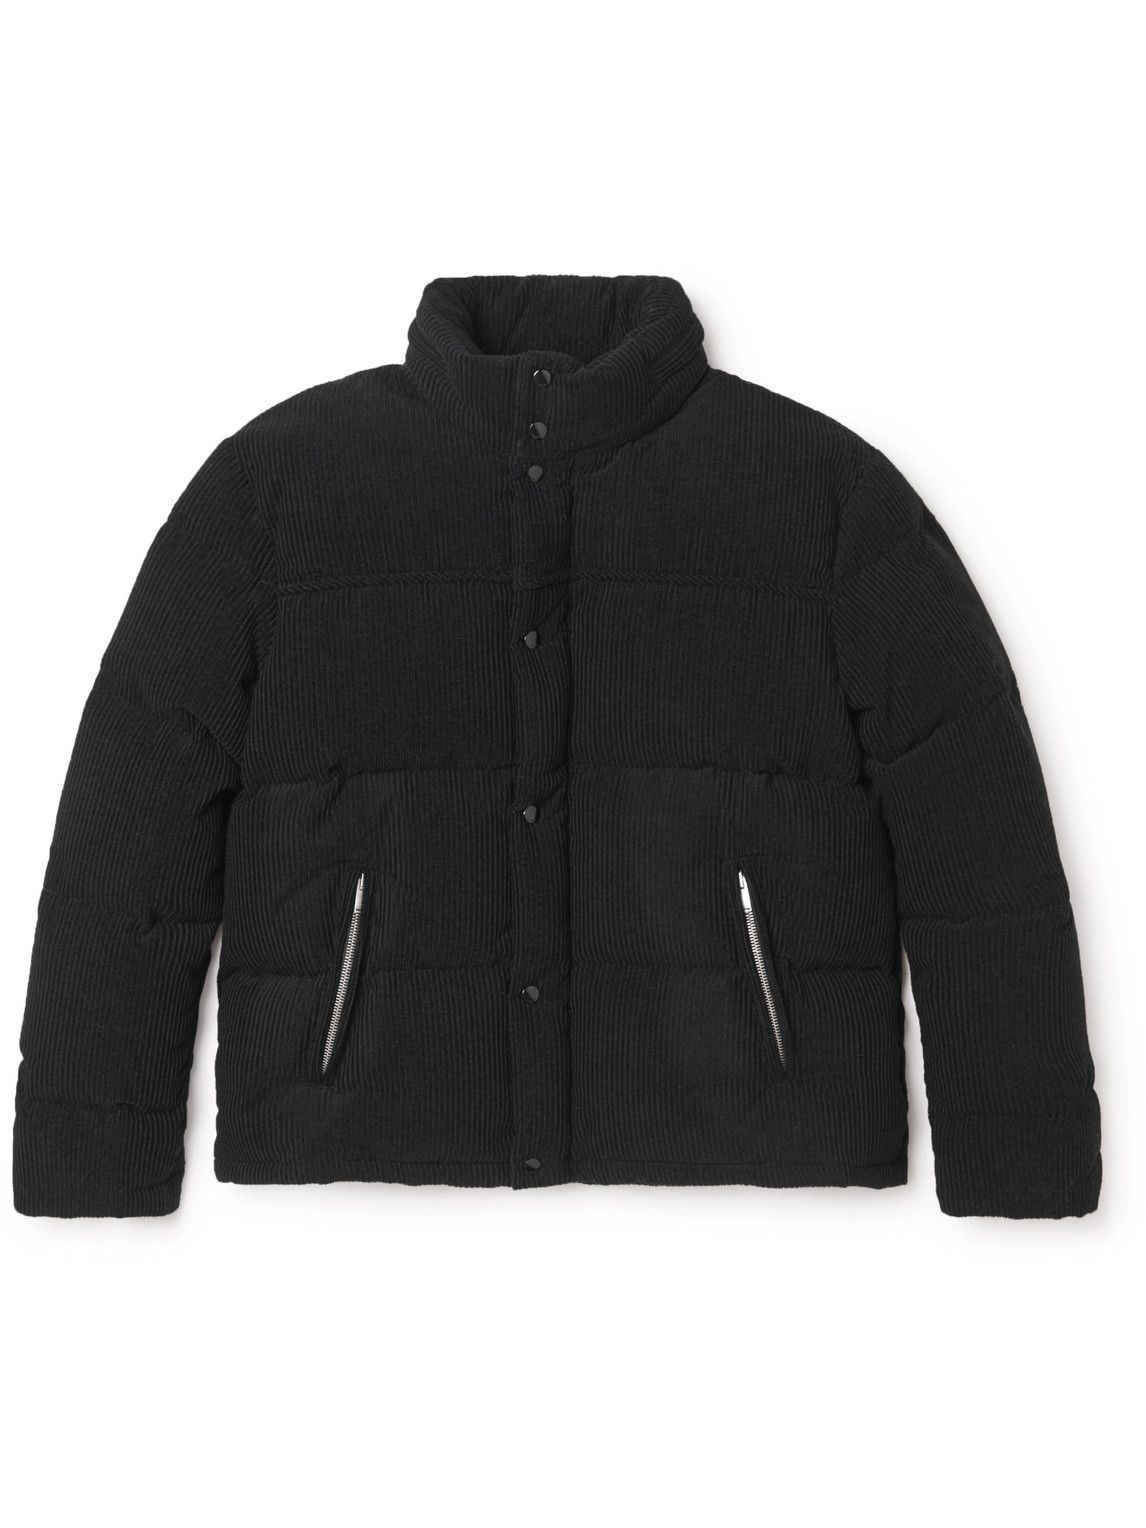 Photo: SAINT LAURENT - Quilted Wool and Cotton-Blend Corduroy Down Jacket - Black